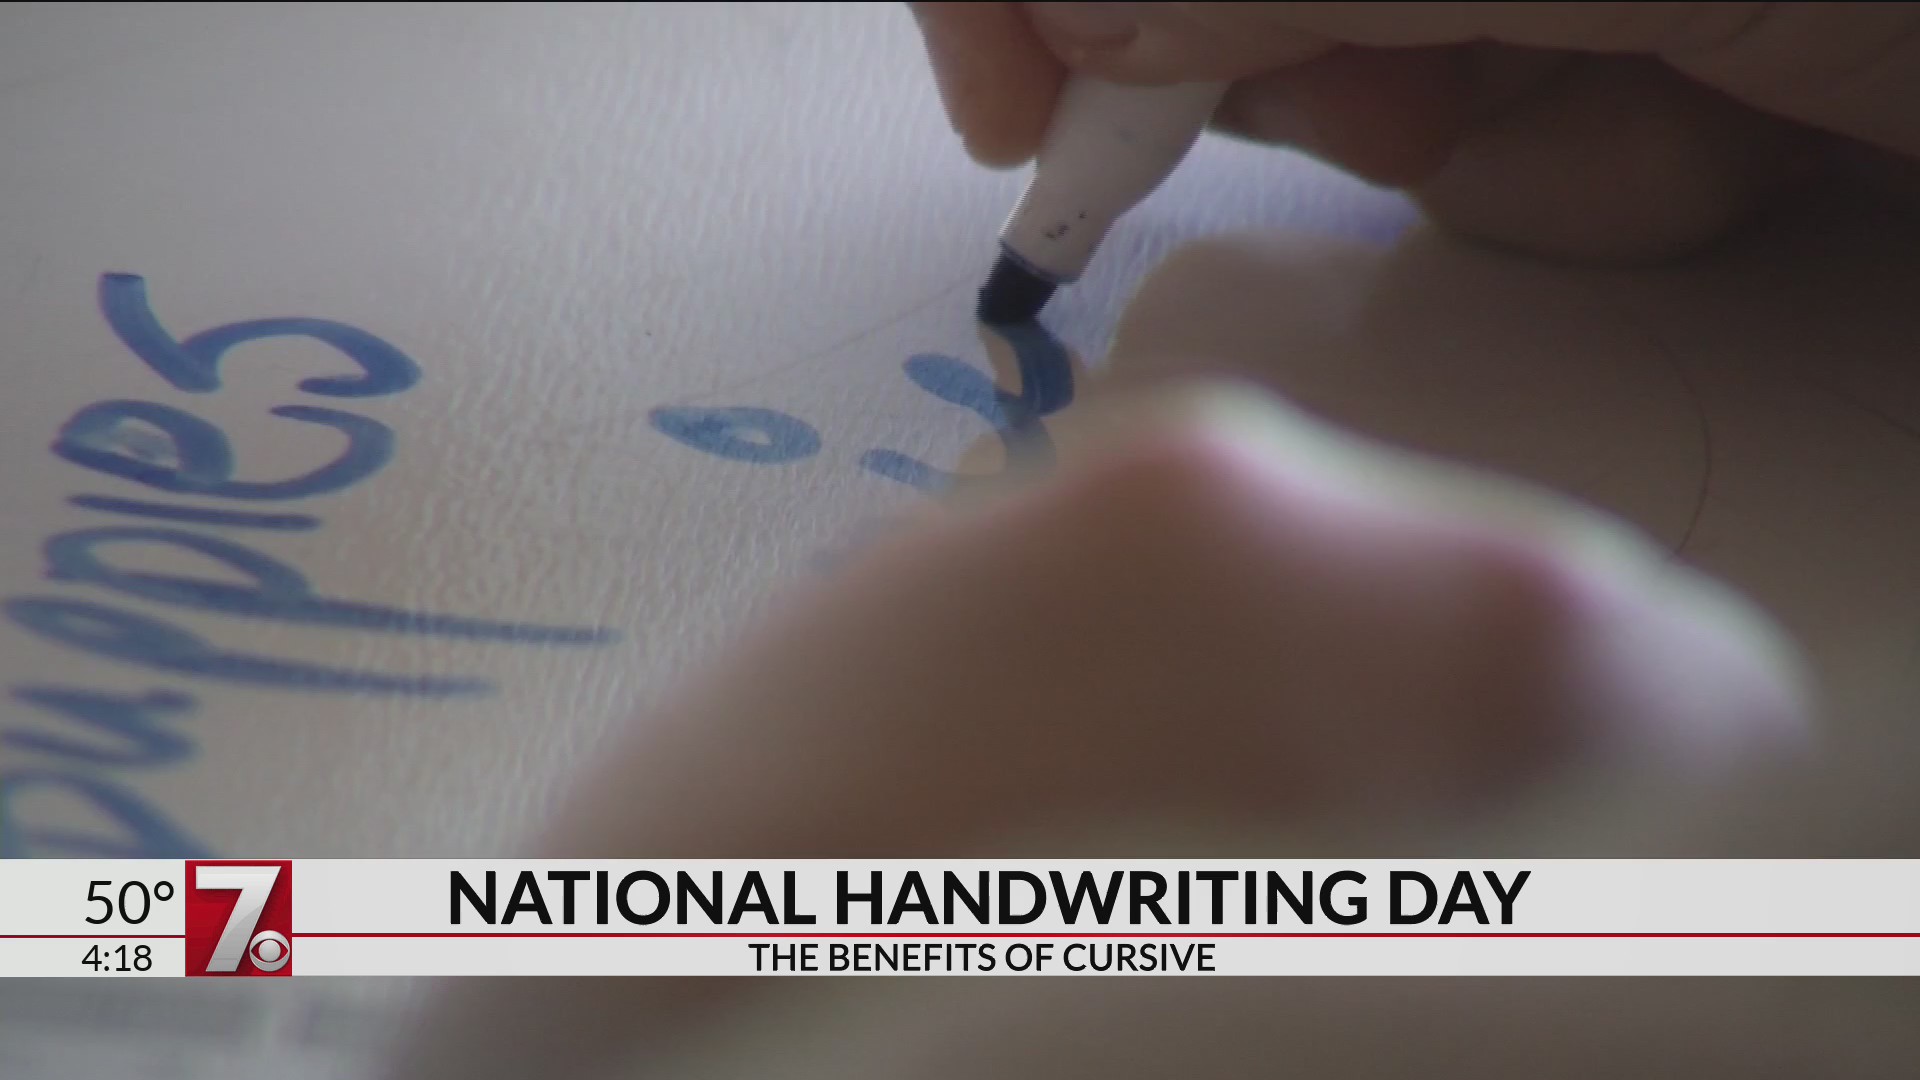 Thumbnail for the video titled "National Handwriting Day"